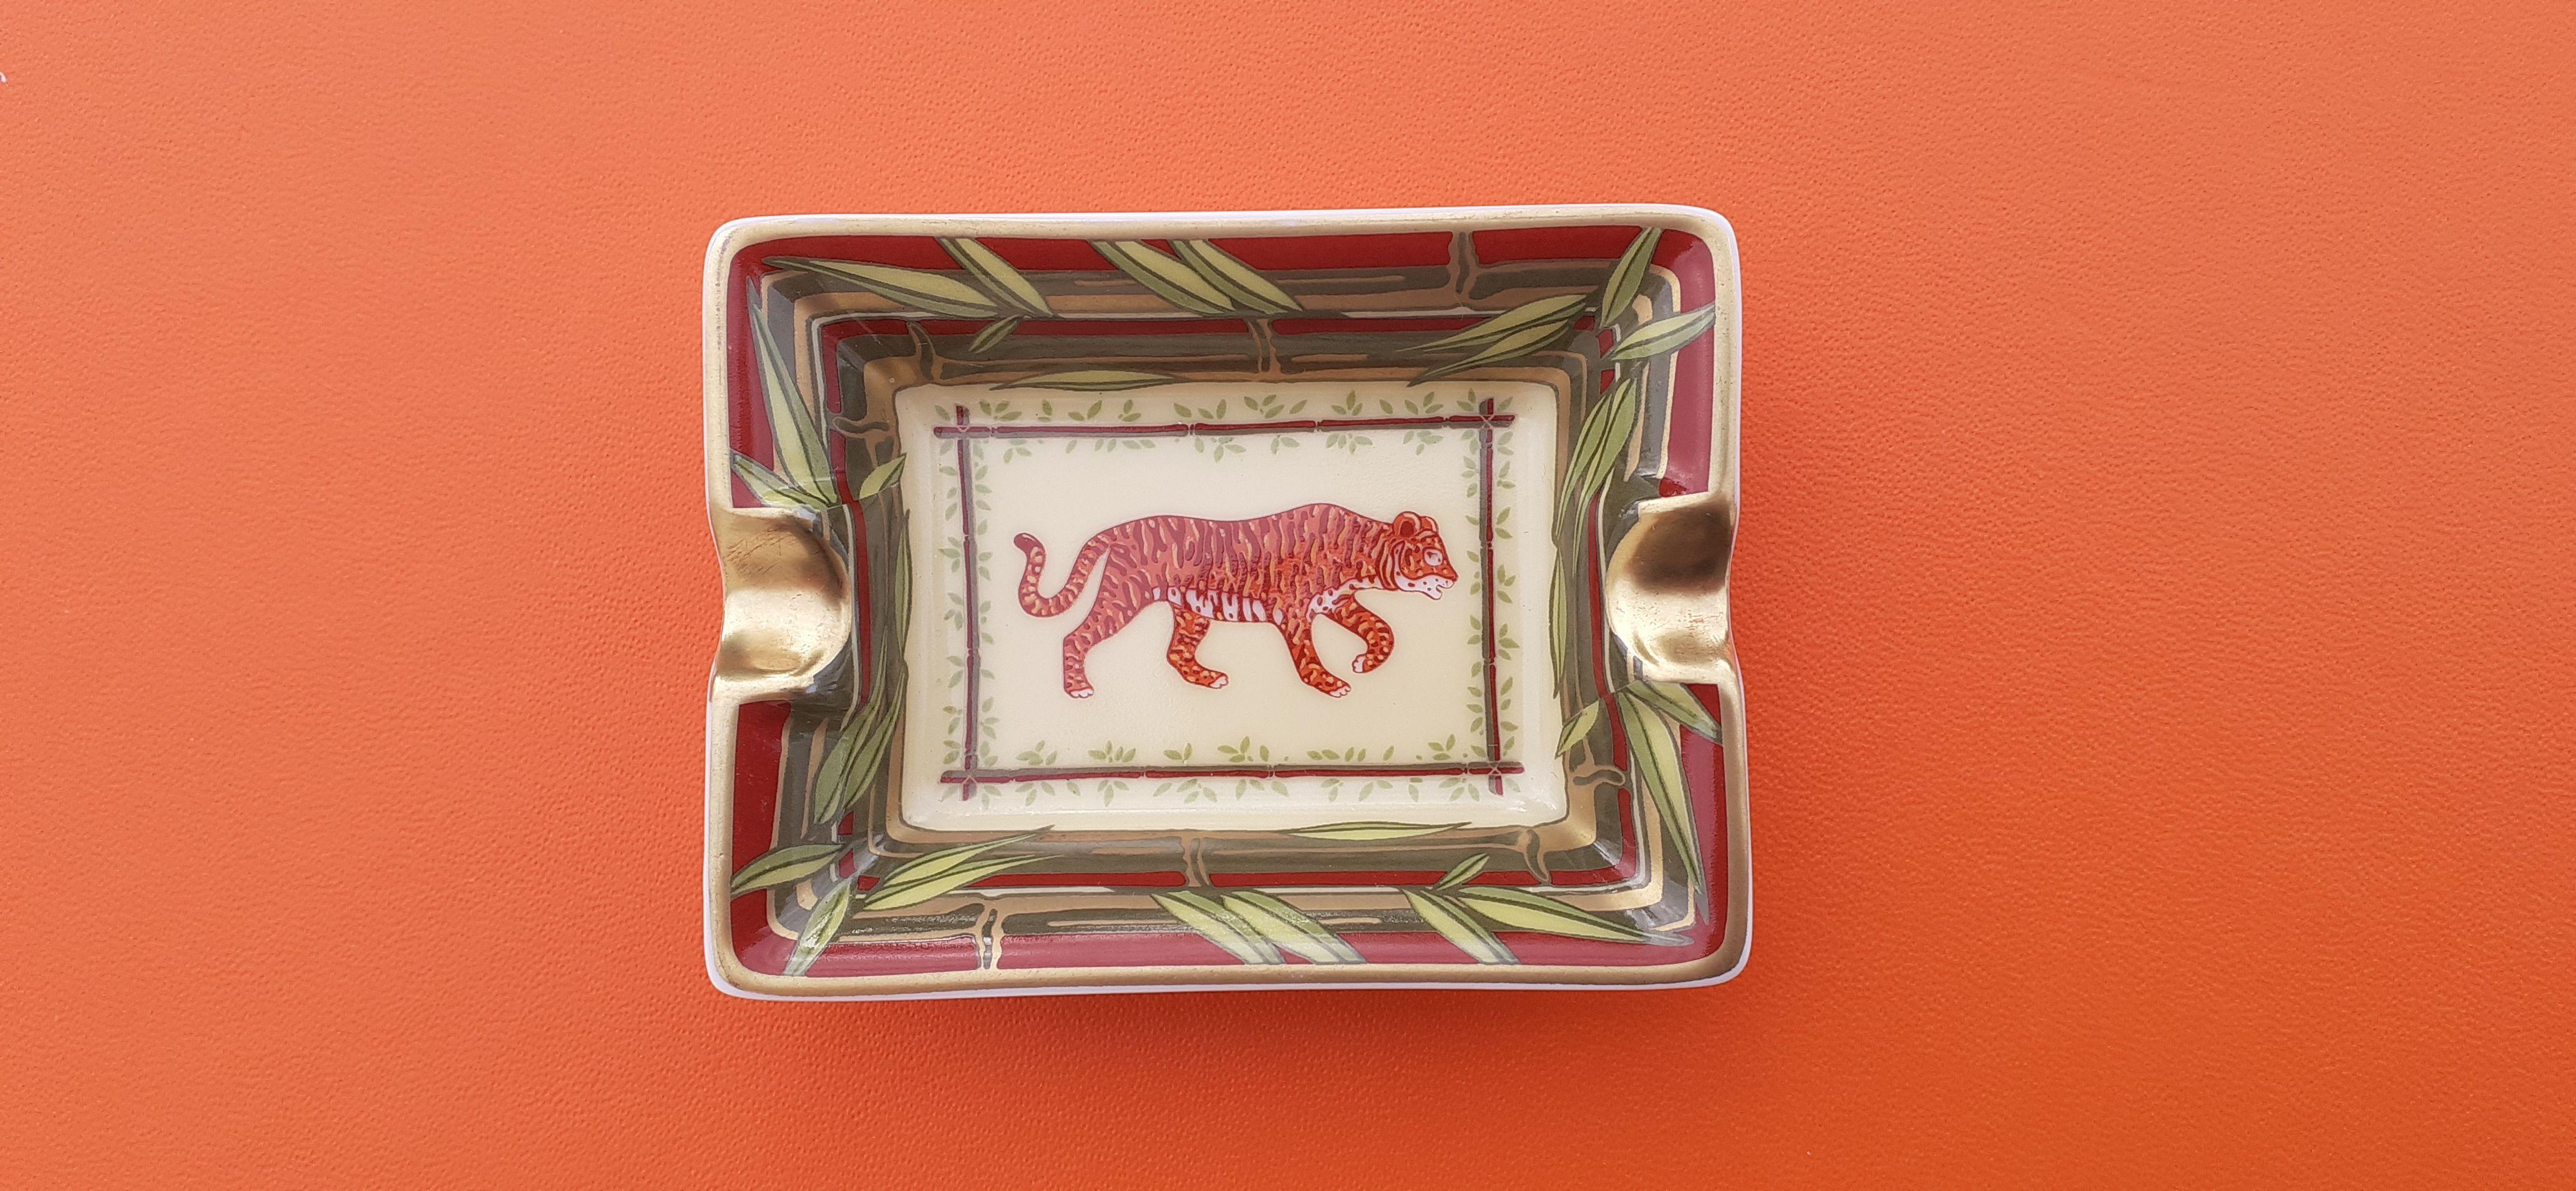 Lovely Authentic Hermès Ashtray

Print: Tiger

Also called 